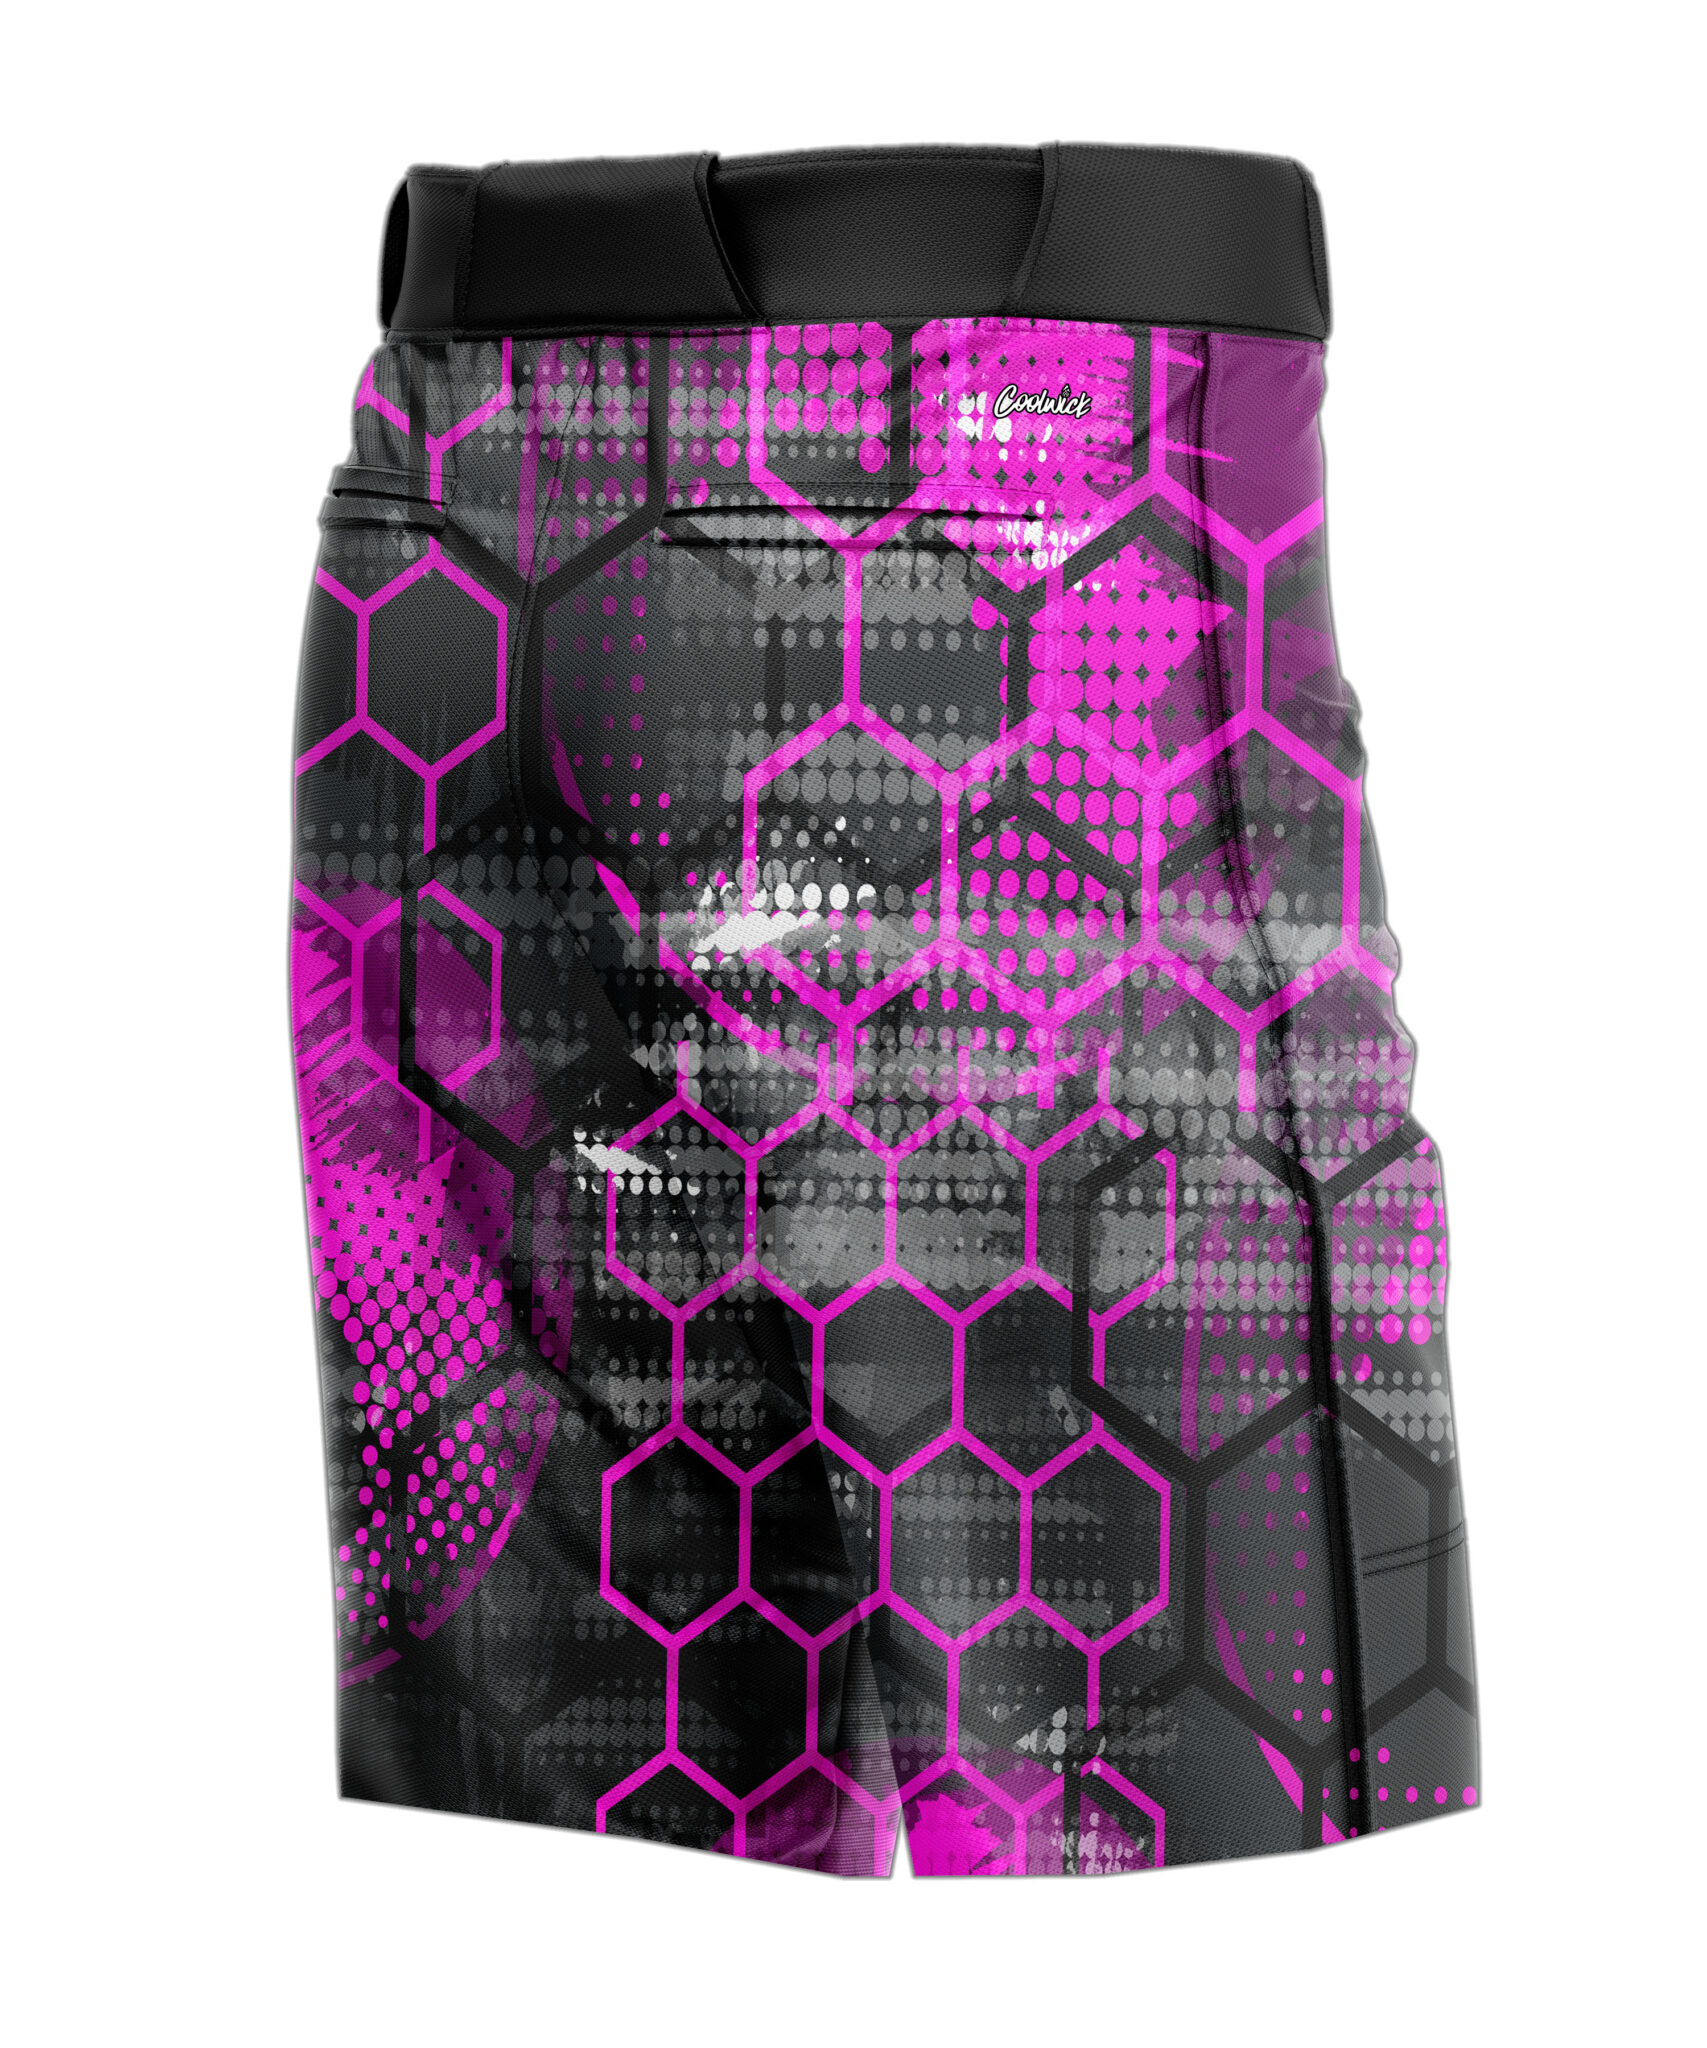 https://www.coolwick.com/wp-content/uploads/2023/03/Pink-honeycomb-back-Shorts-scaled.jpg